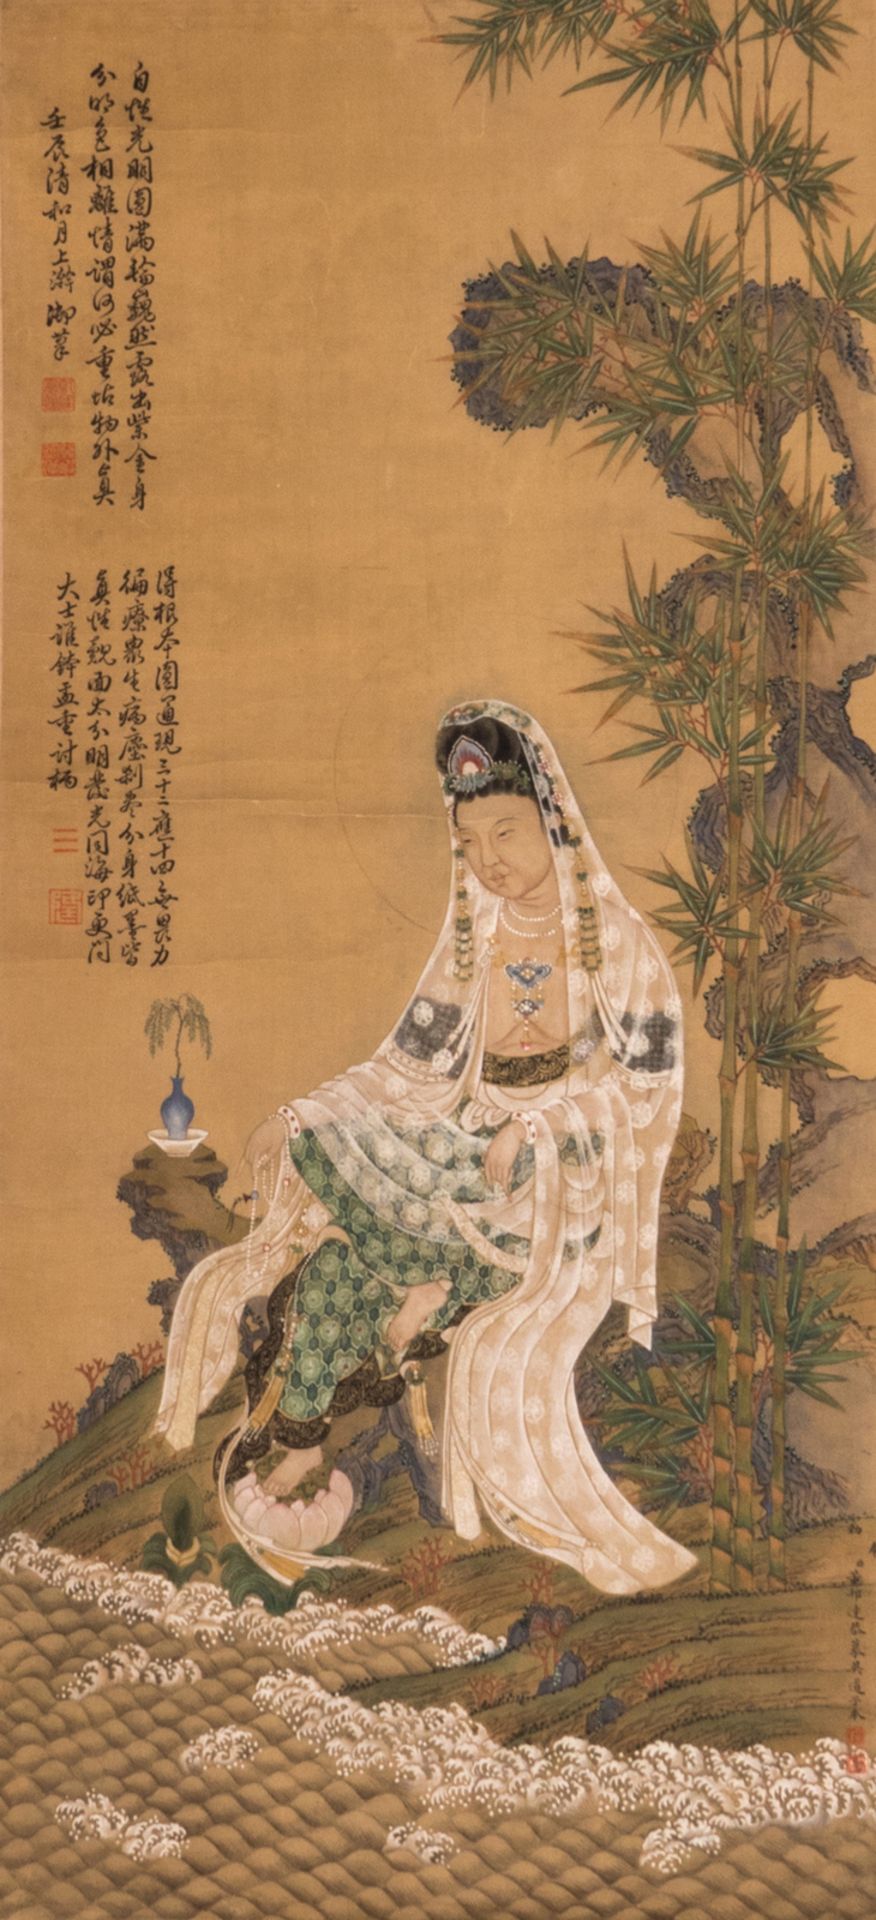 A Chinese scroll depicting Guanyin situated in a landscape near a rippling river, 38 x 84 - 54 x 168